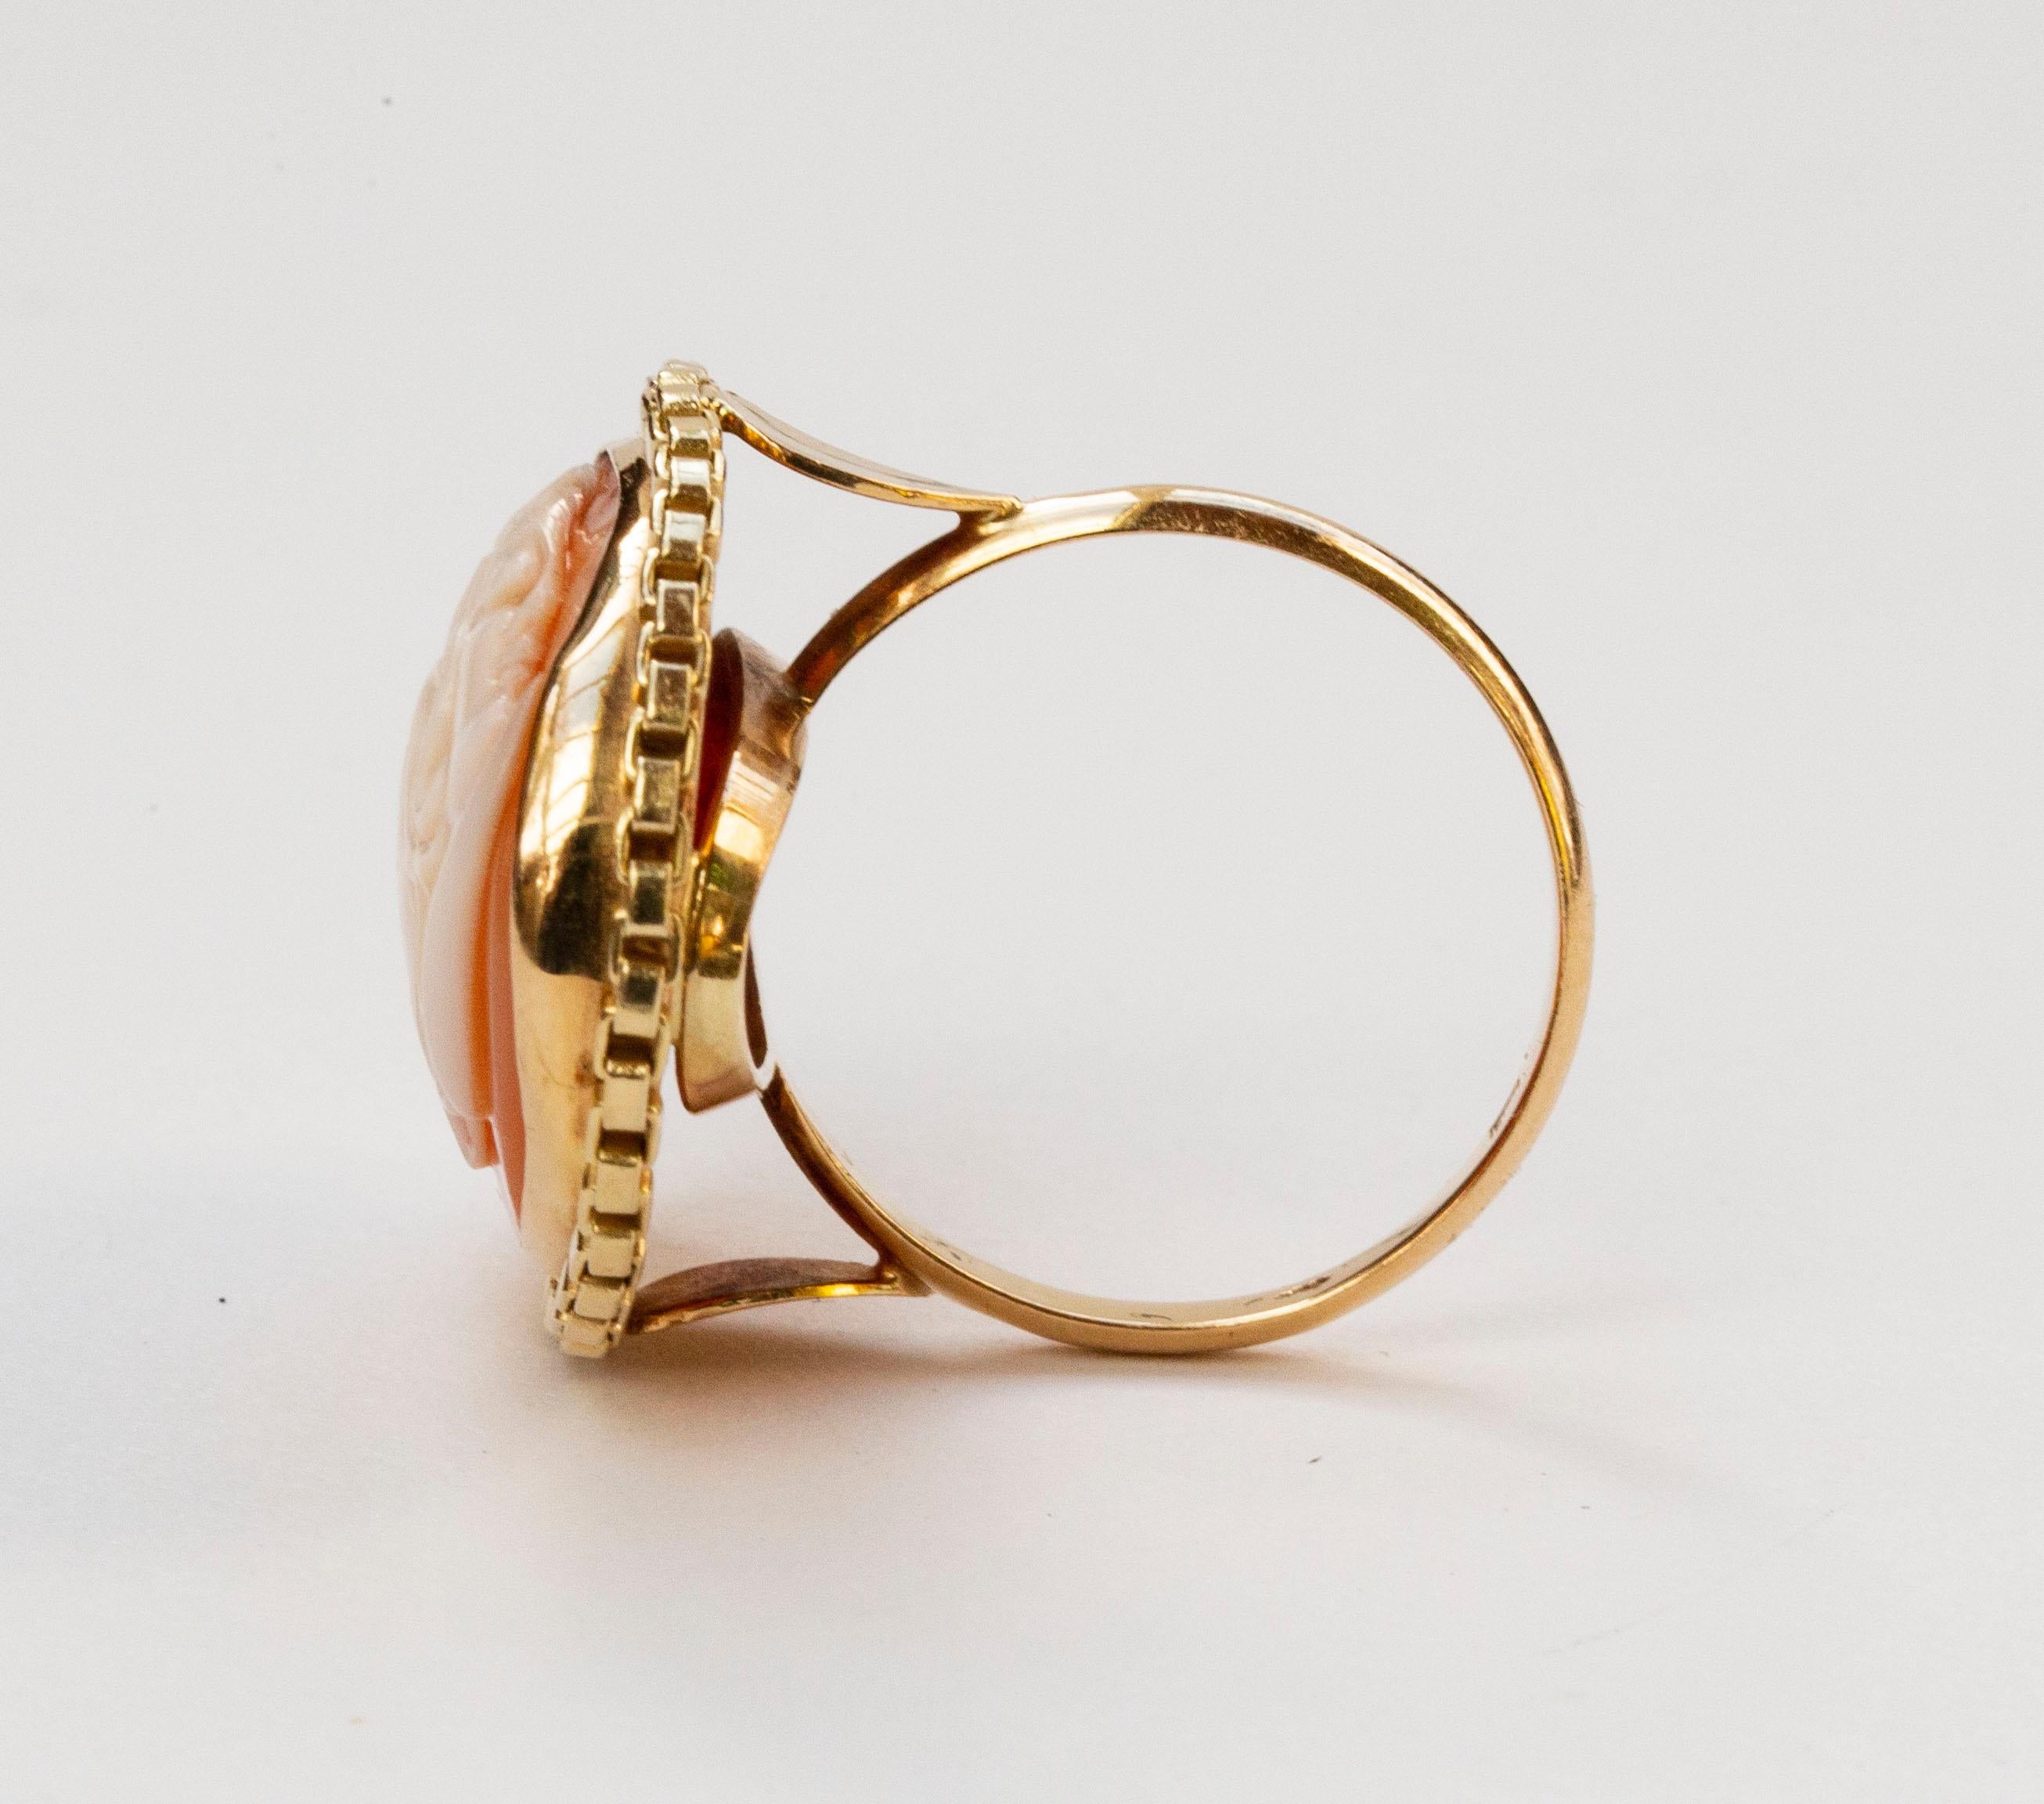 A vintage (ca. 1950s / 1960s) 14 karat solid yellow gold ring with a shell cameo featuring a female silhouette decorated with as openwork chain edge. The ring is marked with 585 that stands for the 14 karat gold content, and it tested positive for